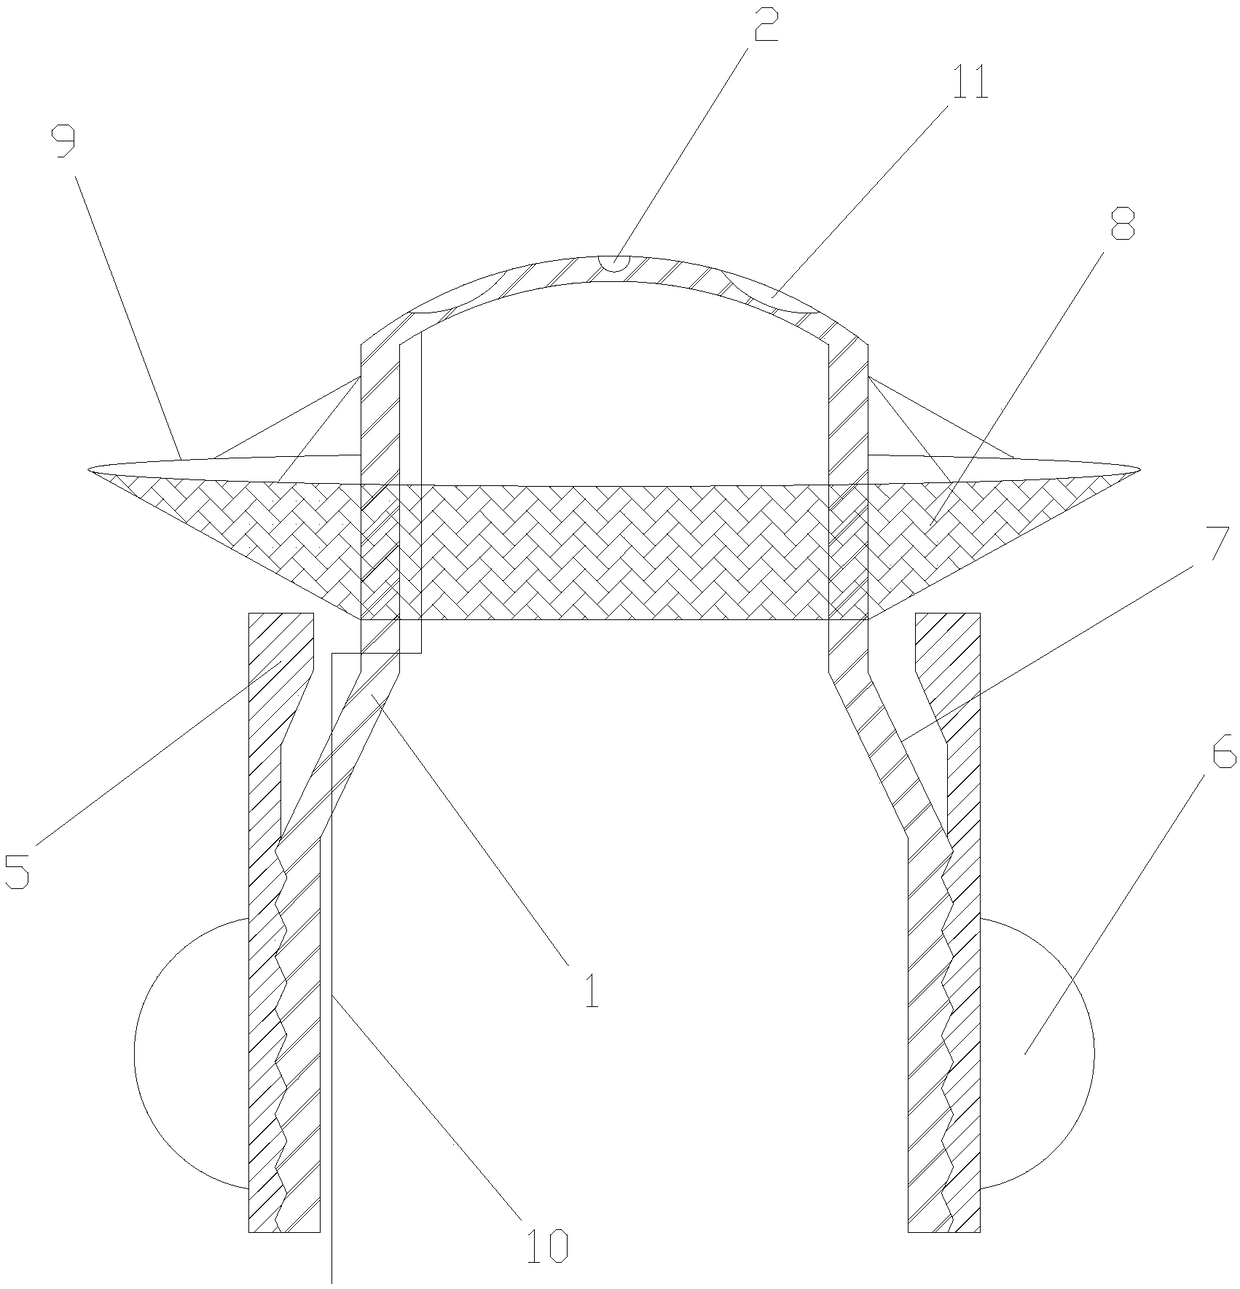 Artificial insemination assisting device